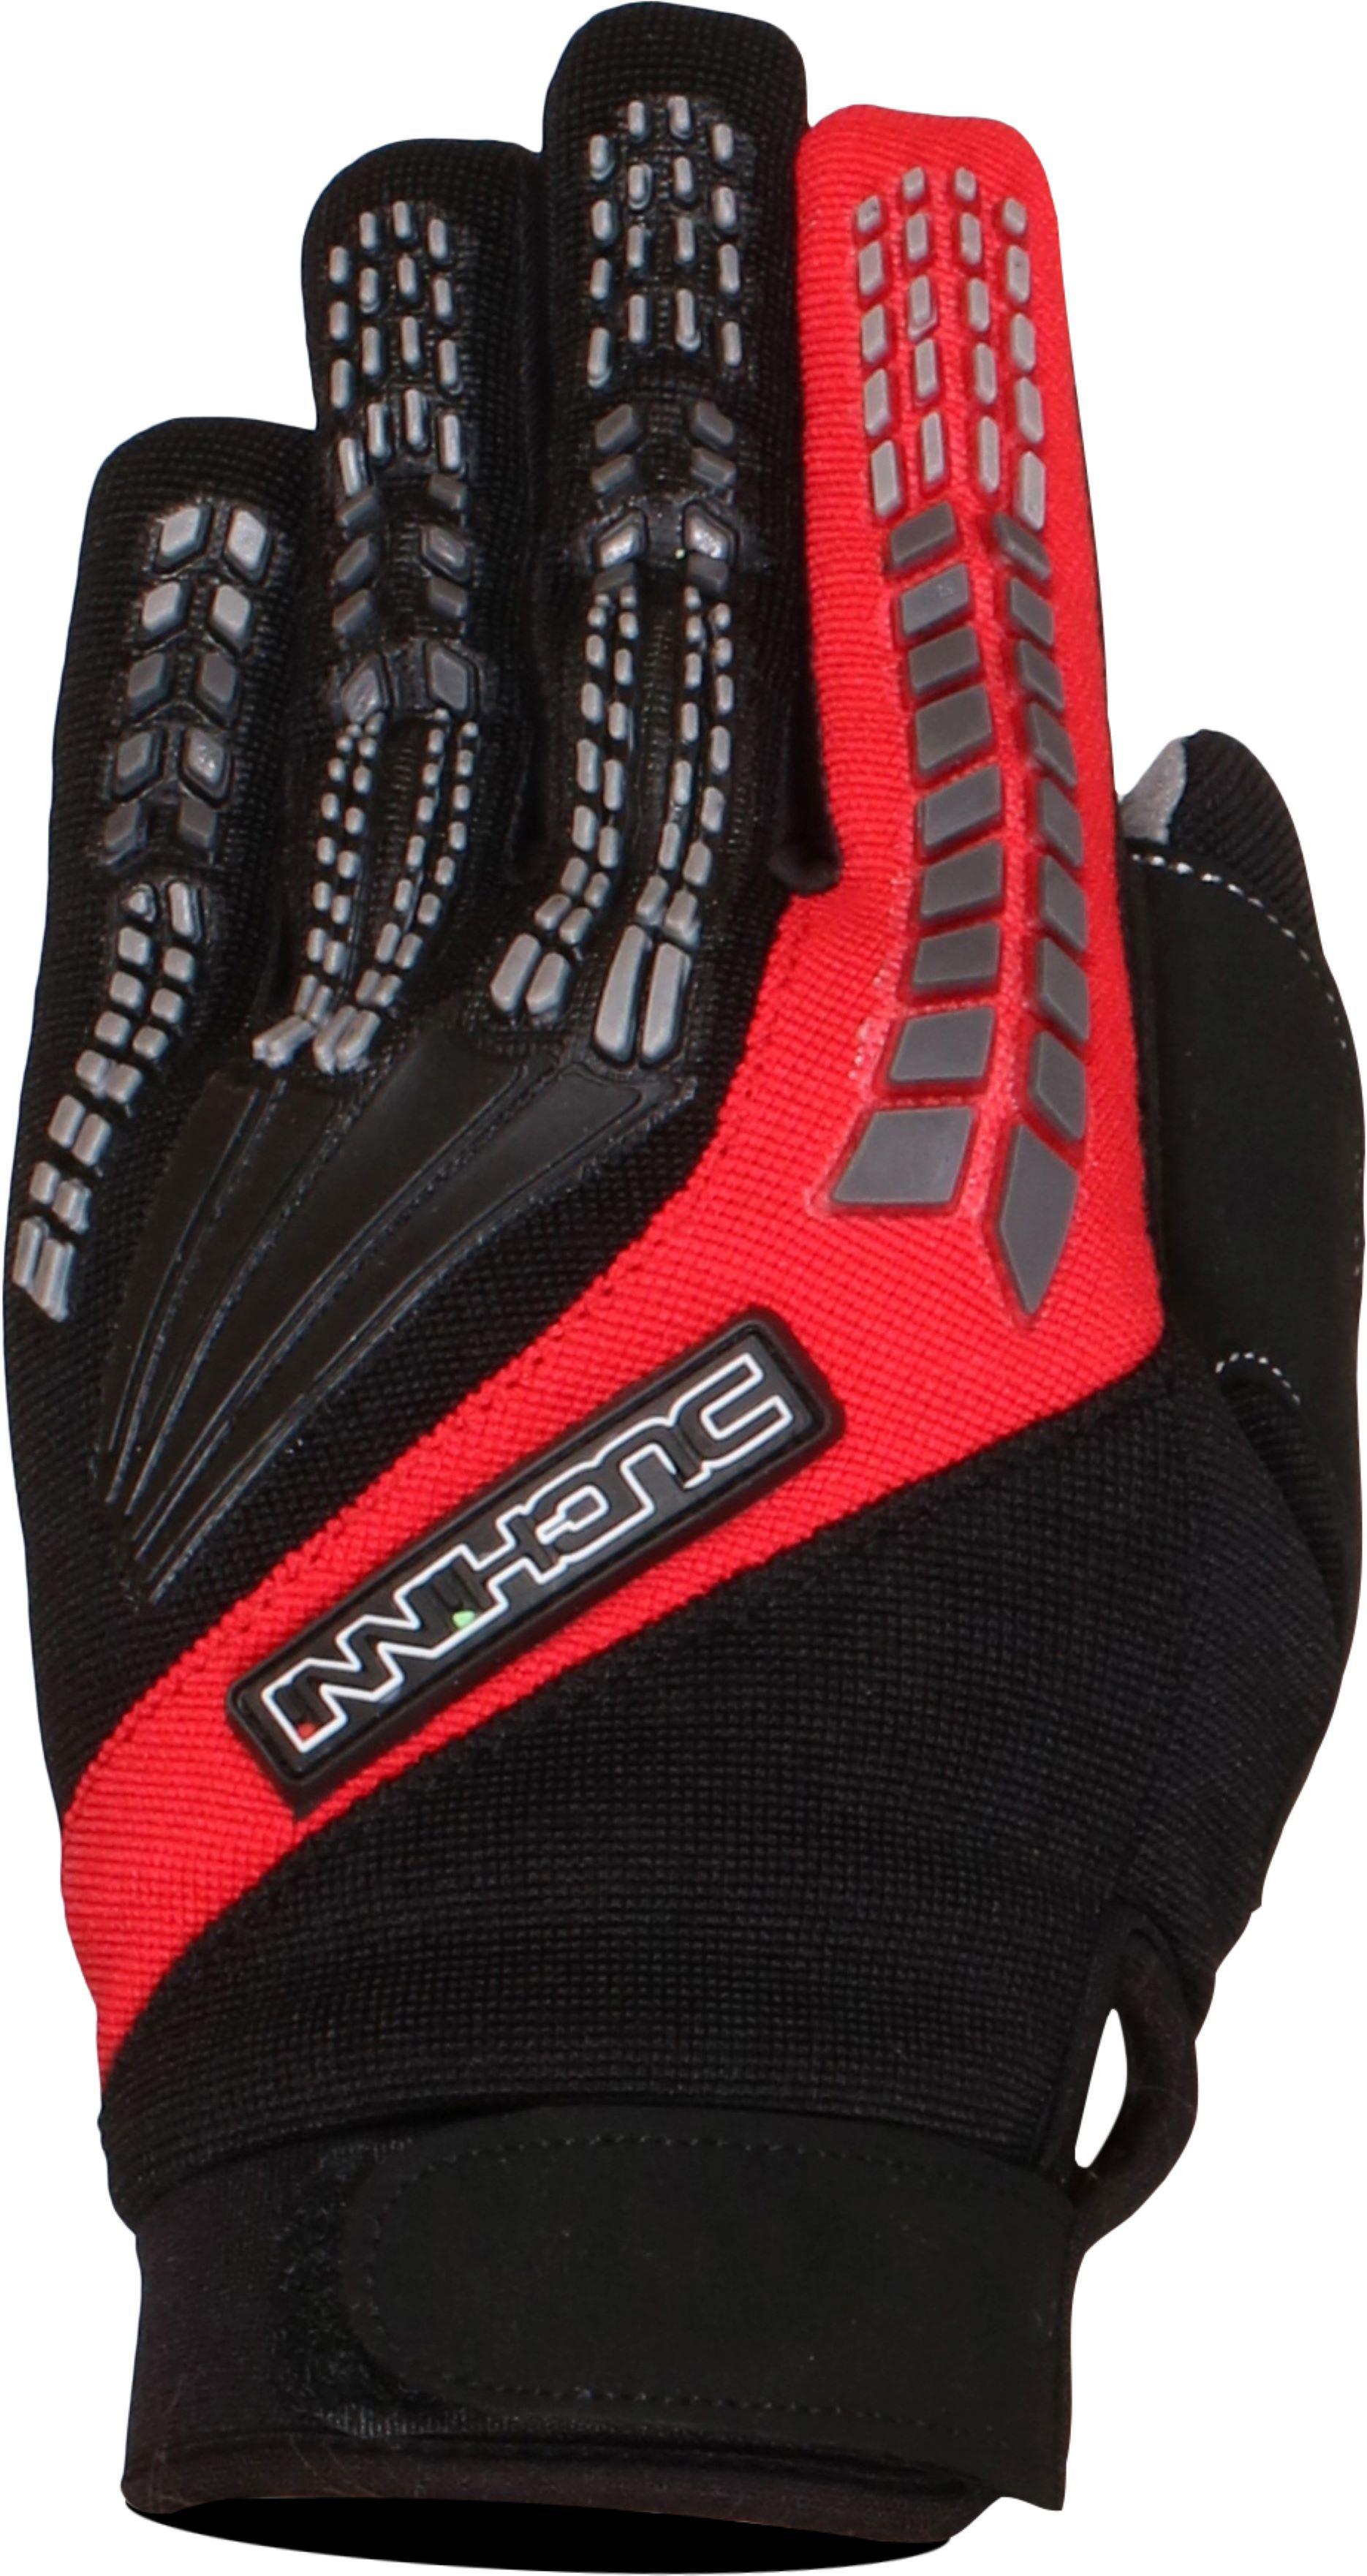 Duchinni Focus Motorcycle Gloves - Black And Red, M